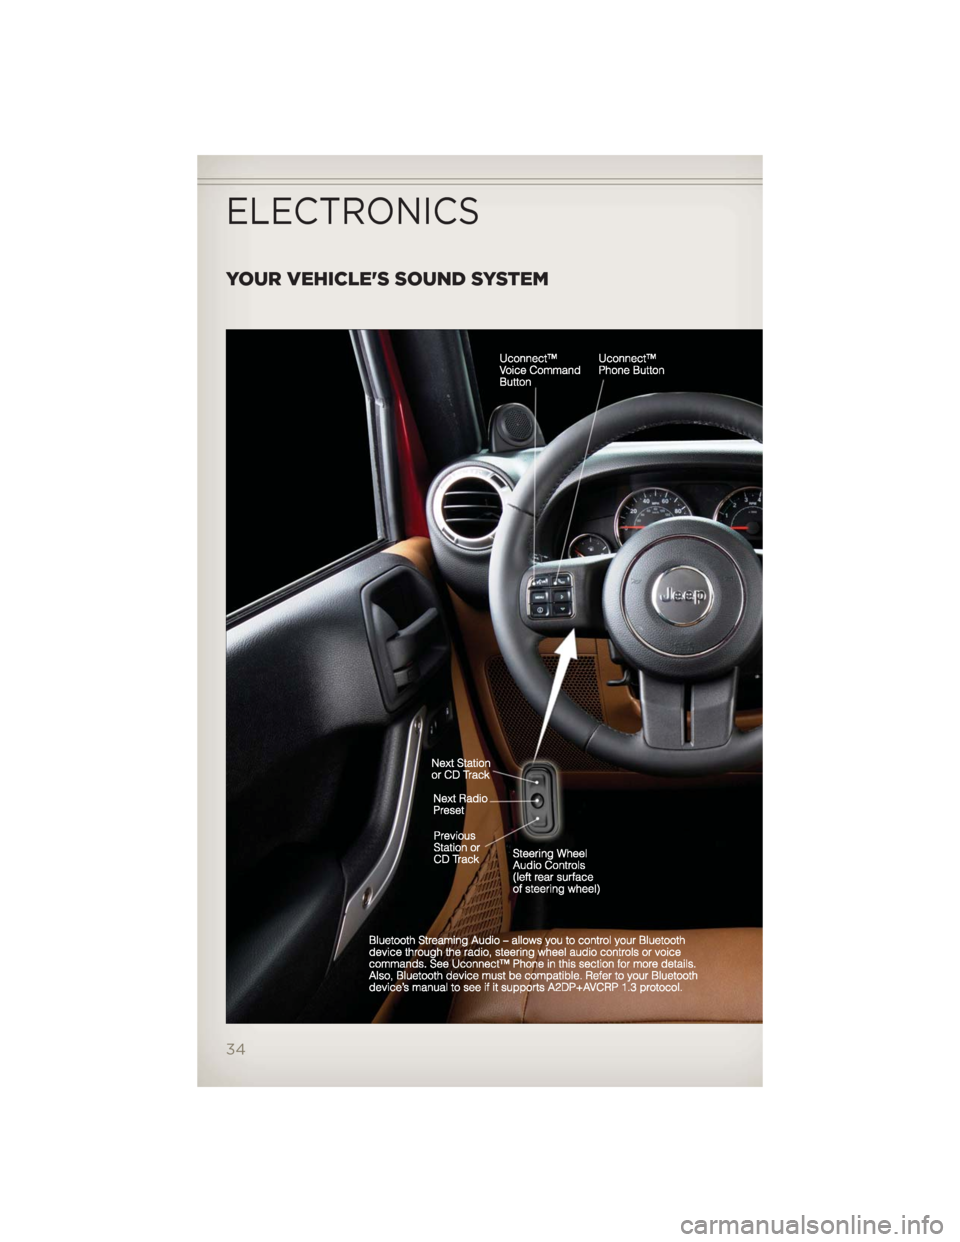 JEEP WRANGLER 2012 JK / 3.G Owners Guide YOUR VEHICLES SOUND SYSTEM
ELECTRONICS
34 